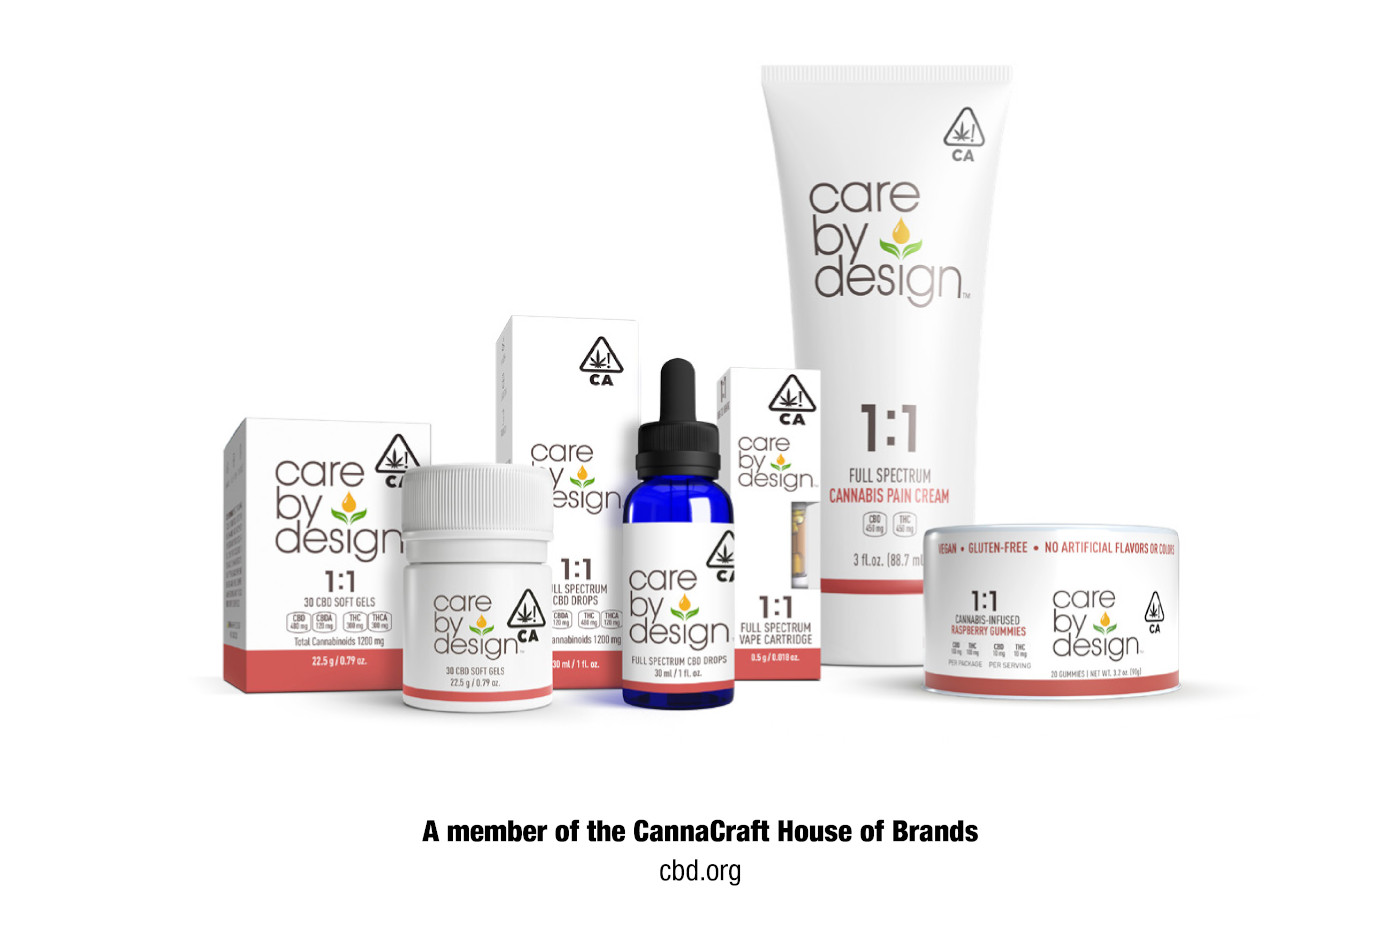 CannaCraft Care By Design CBD products mgretailer